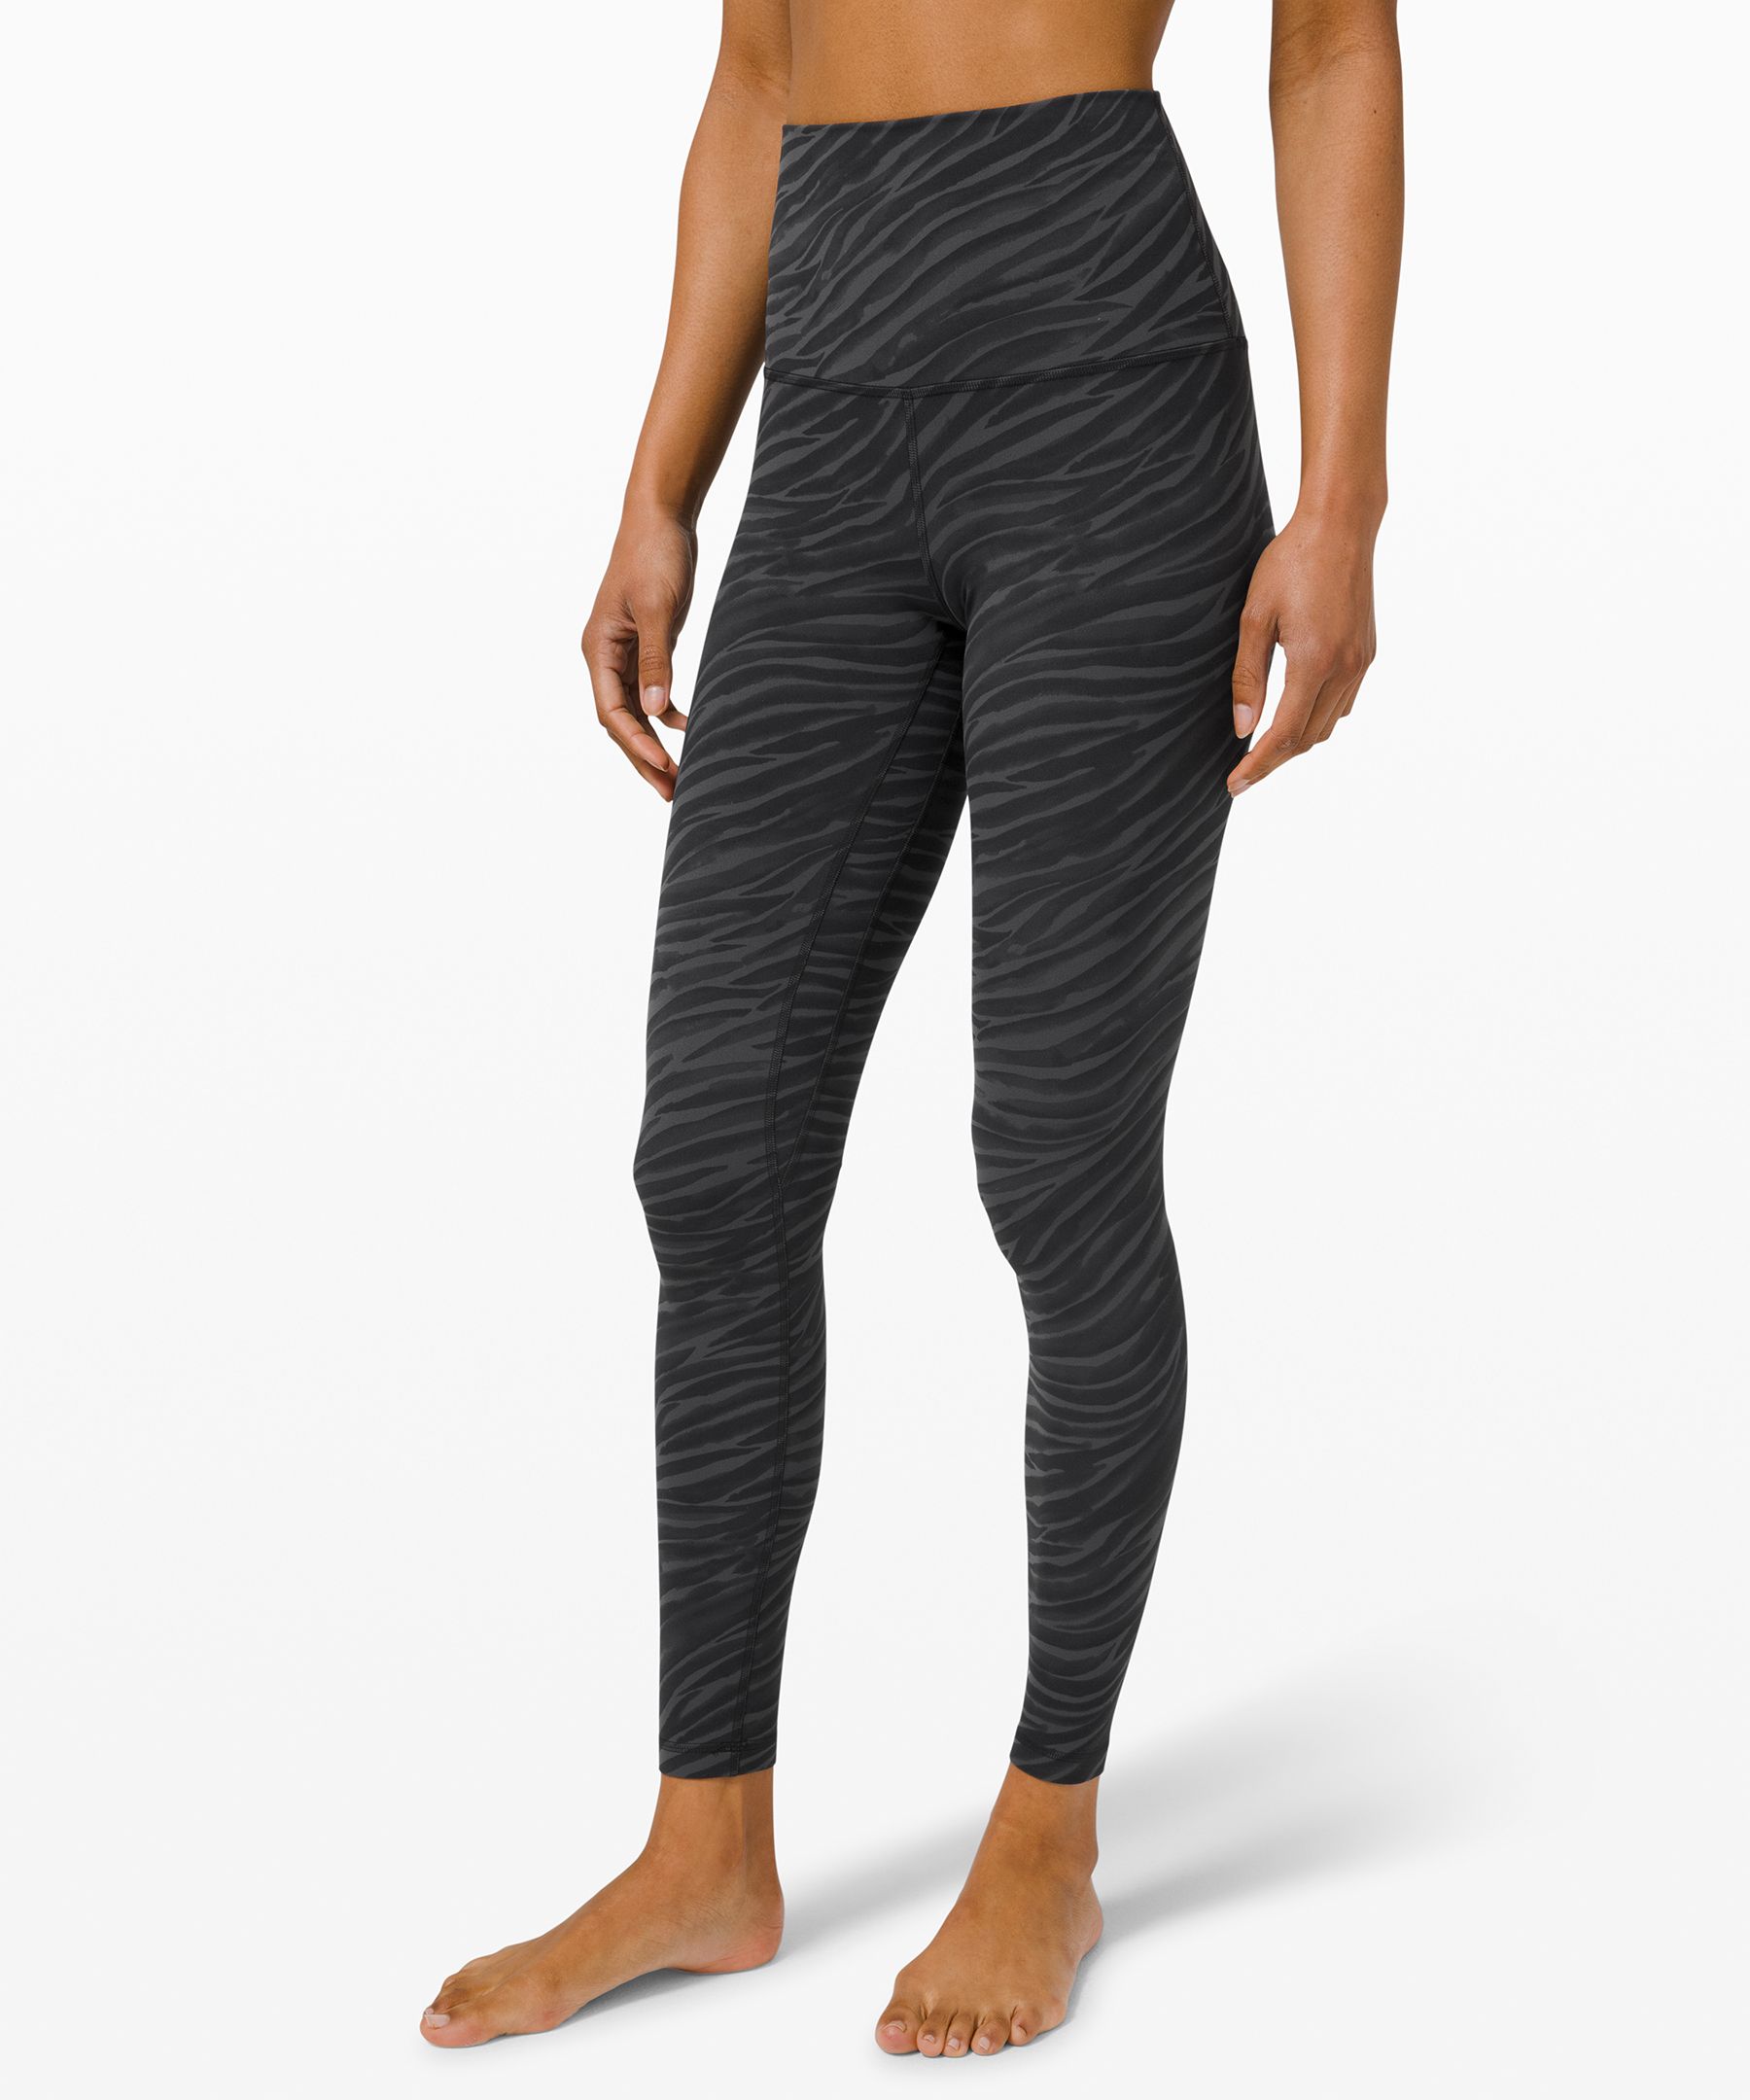 Lululemon Align™ Super High-rise Pant 28" *online Only In Printed